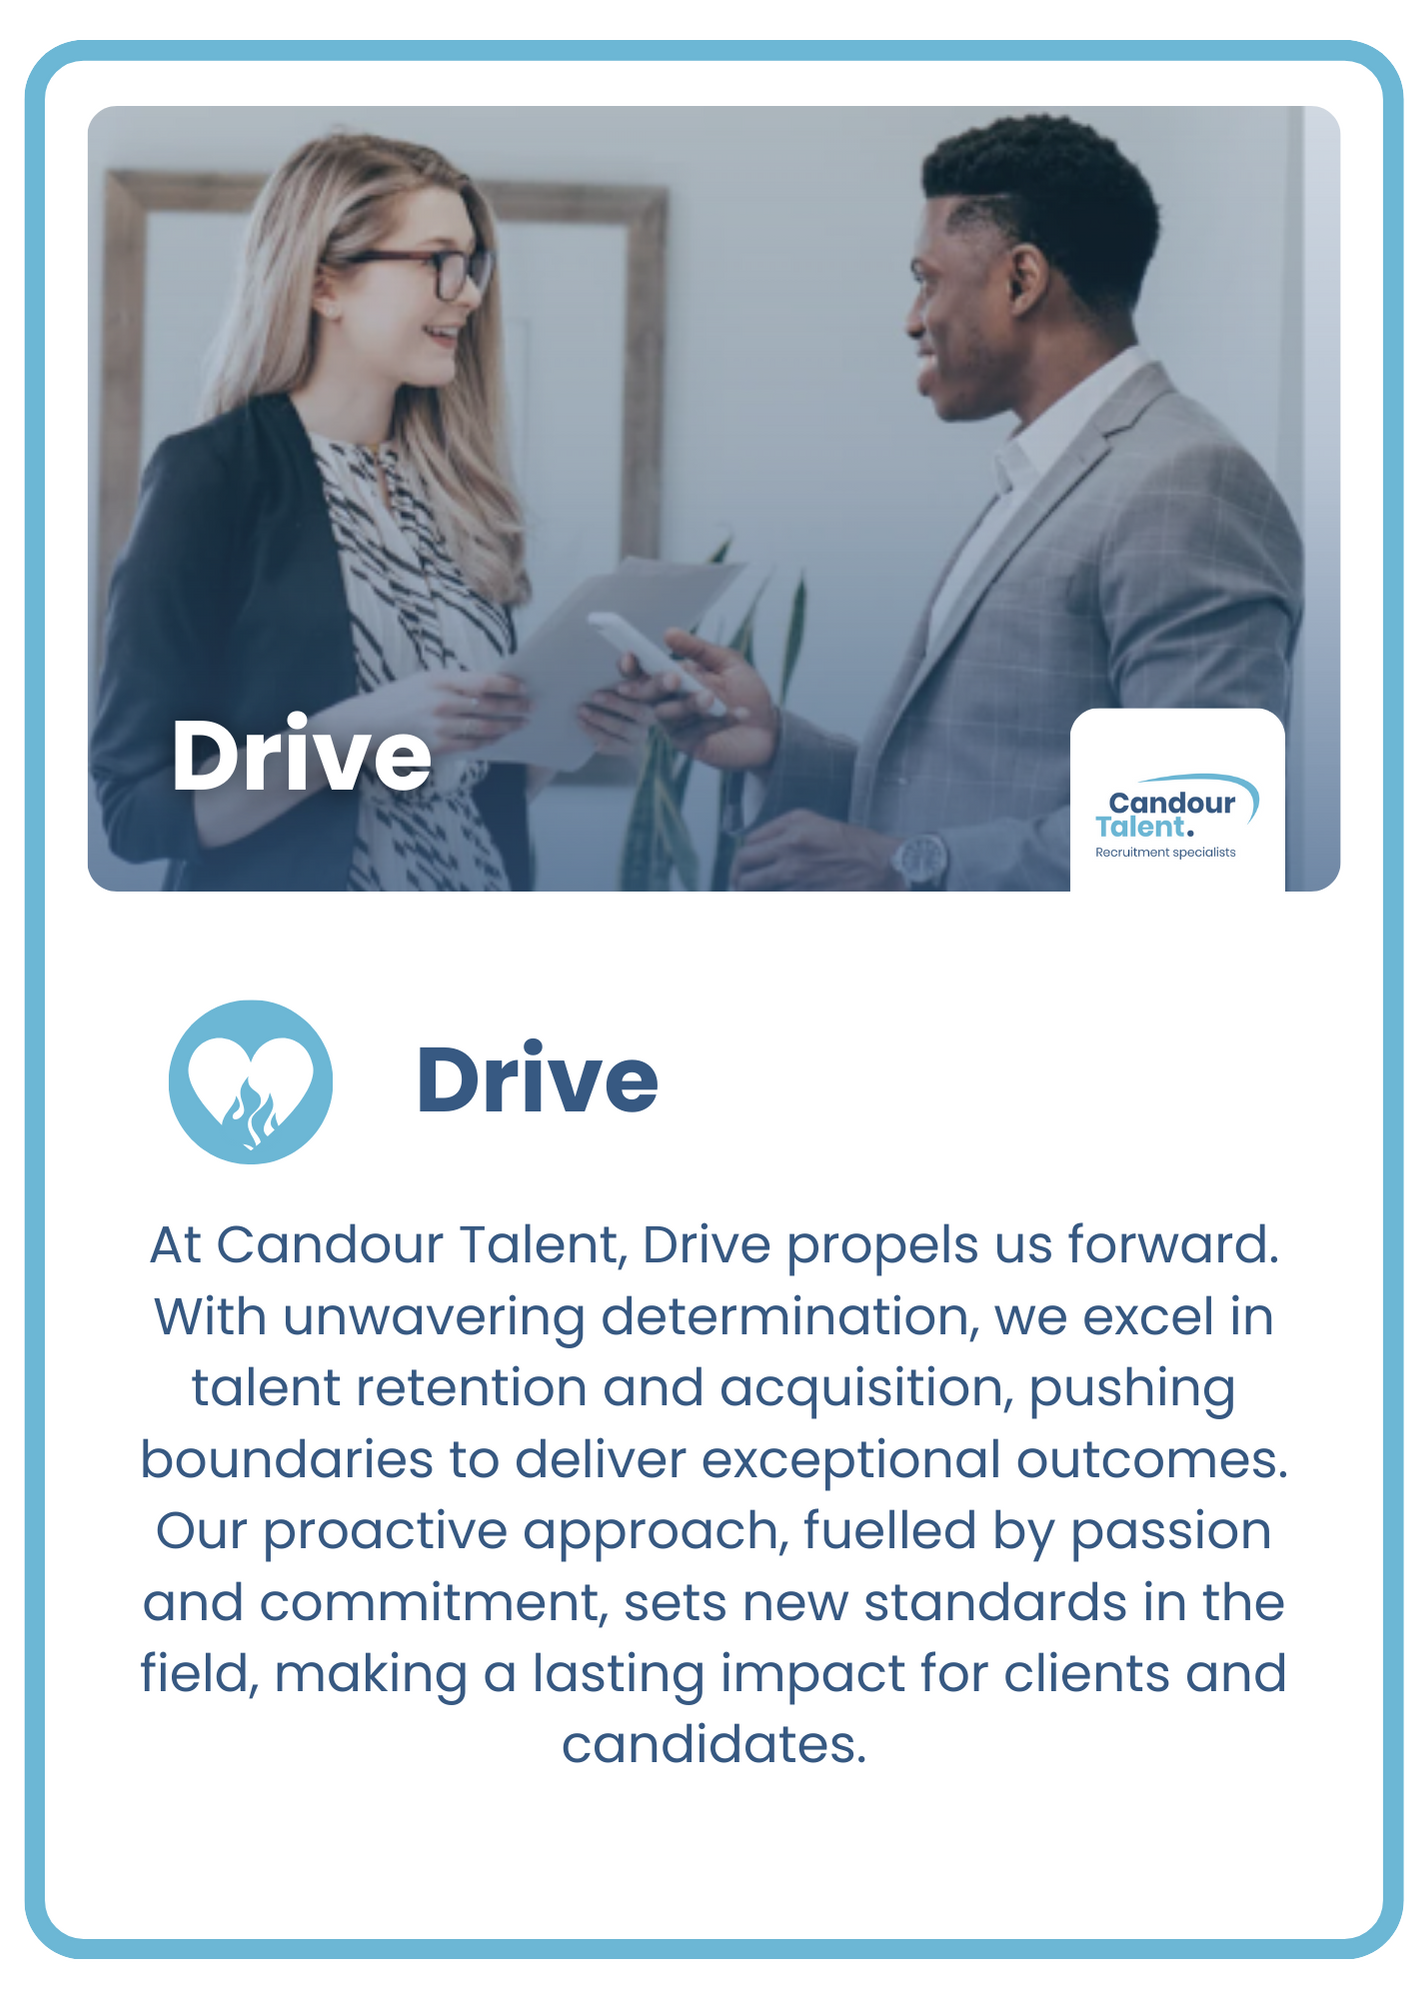  Candour Talent Recruitment Agency - Our Values page - our values of Drive. Text: At Candour Talent, Drive propels us forward. With unwavering determination, we excel in talent retention and acquisition, pushing boundaries to deliver exceptional outcomes. Our proactive approach, fueled by passion and commitment, sets new standards in the field, making a lasting impact for clients and candidates.